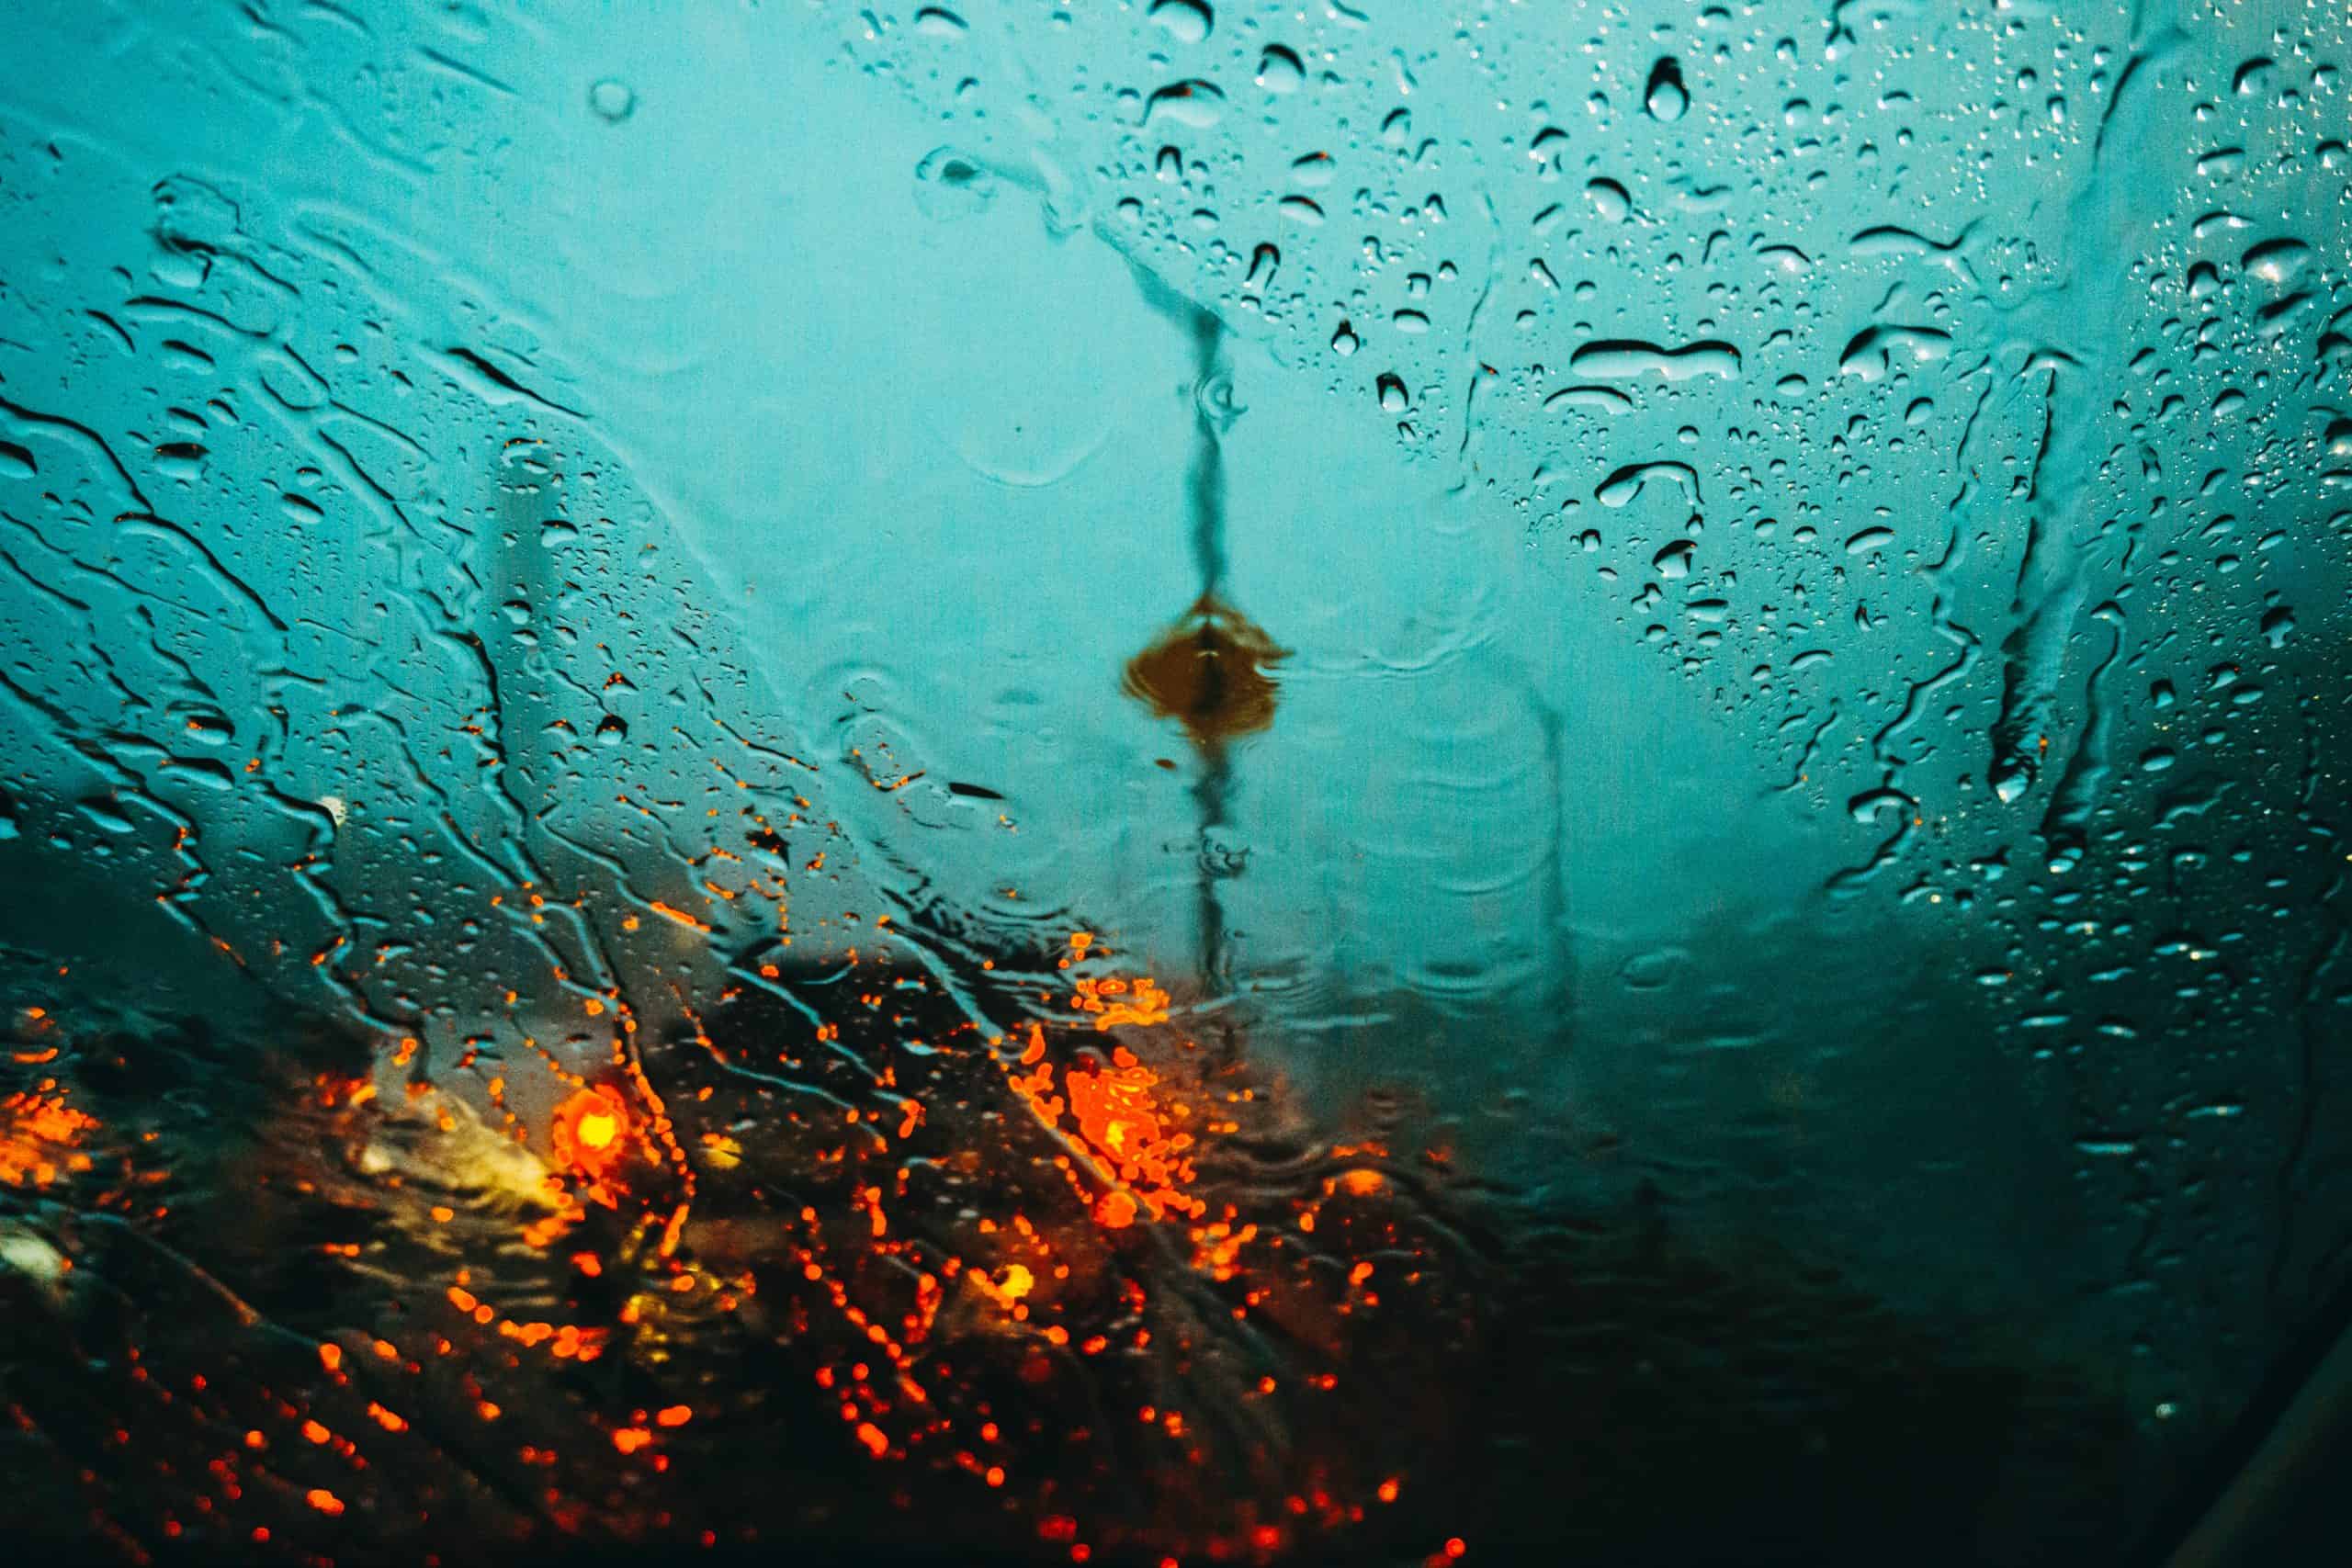 View of the road through a wet windshield.